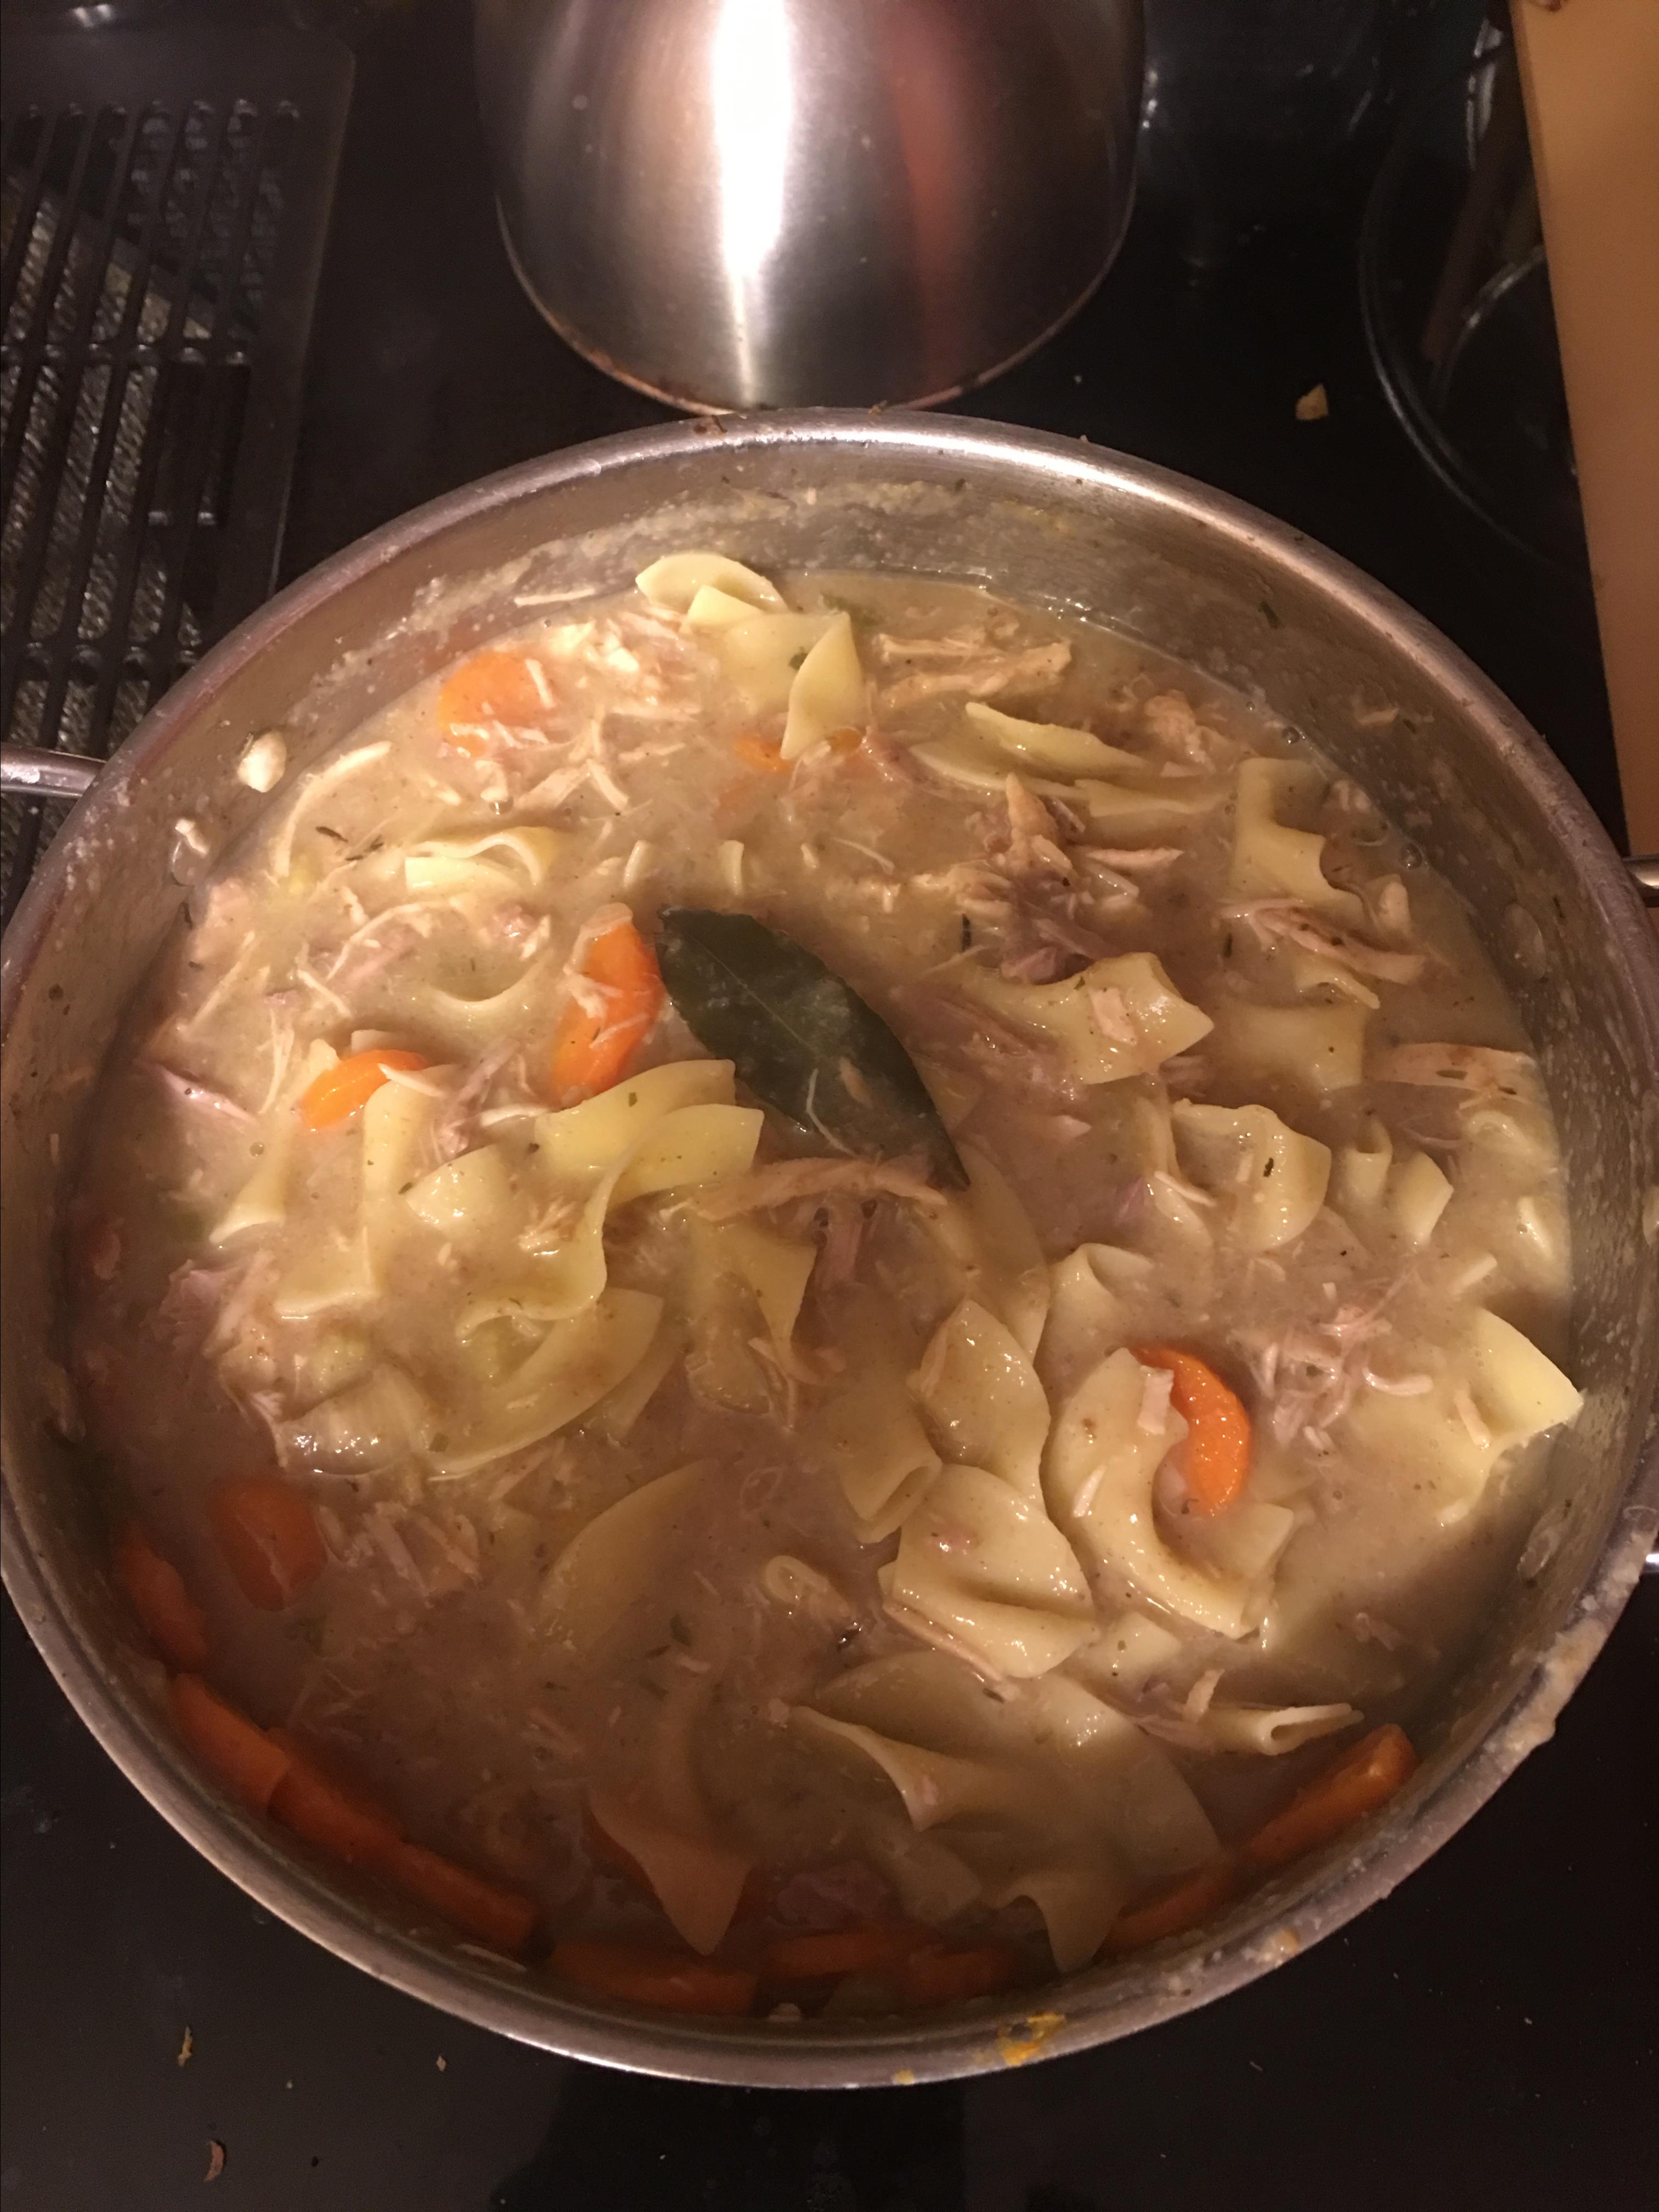 Day-After-Thanksgiving Turkey Carcass Soup 